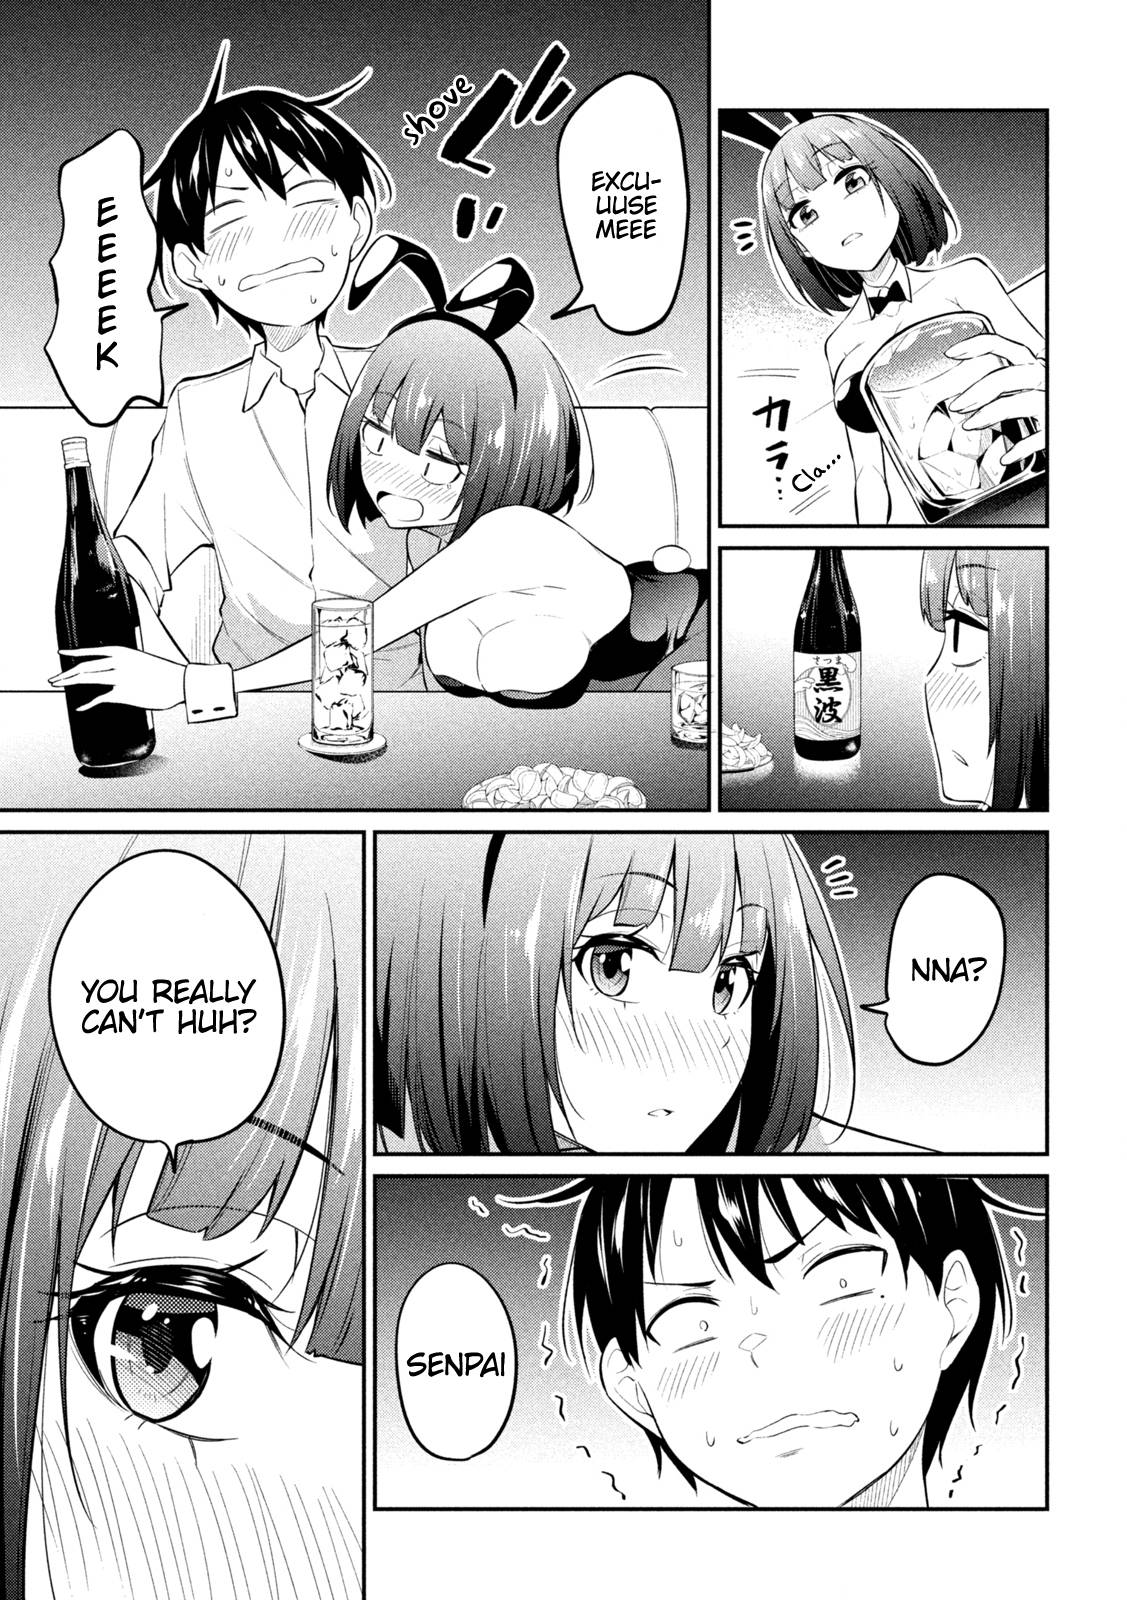 Home Cabaret ~Operation: Making a Cabaret Club at Home so Nii-chan Can Get Used to Girls - chapter 6 - #6